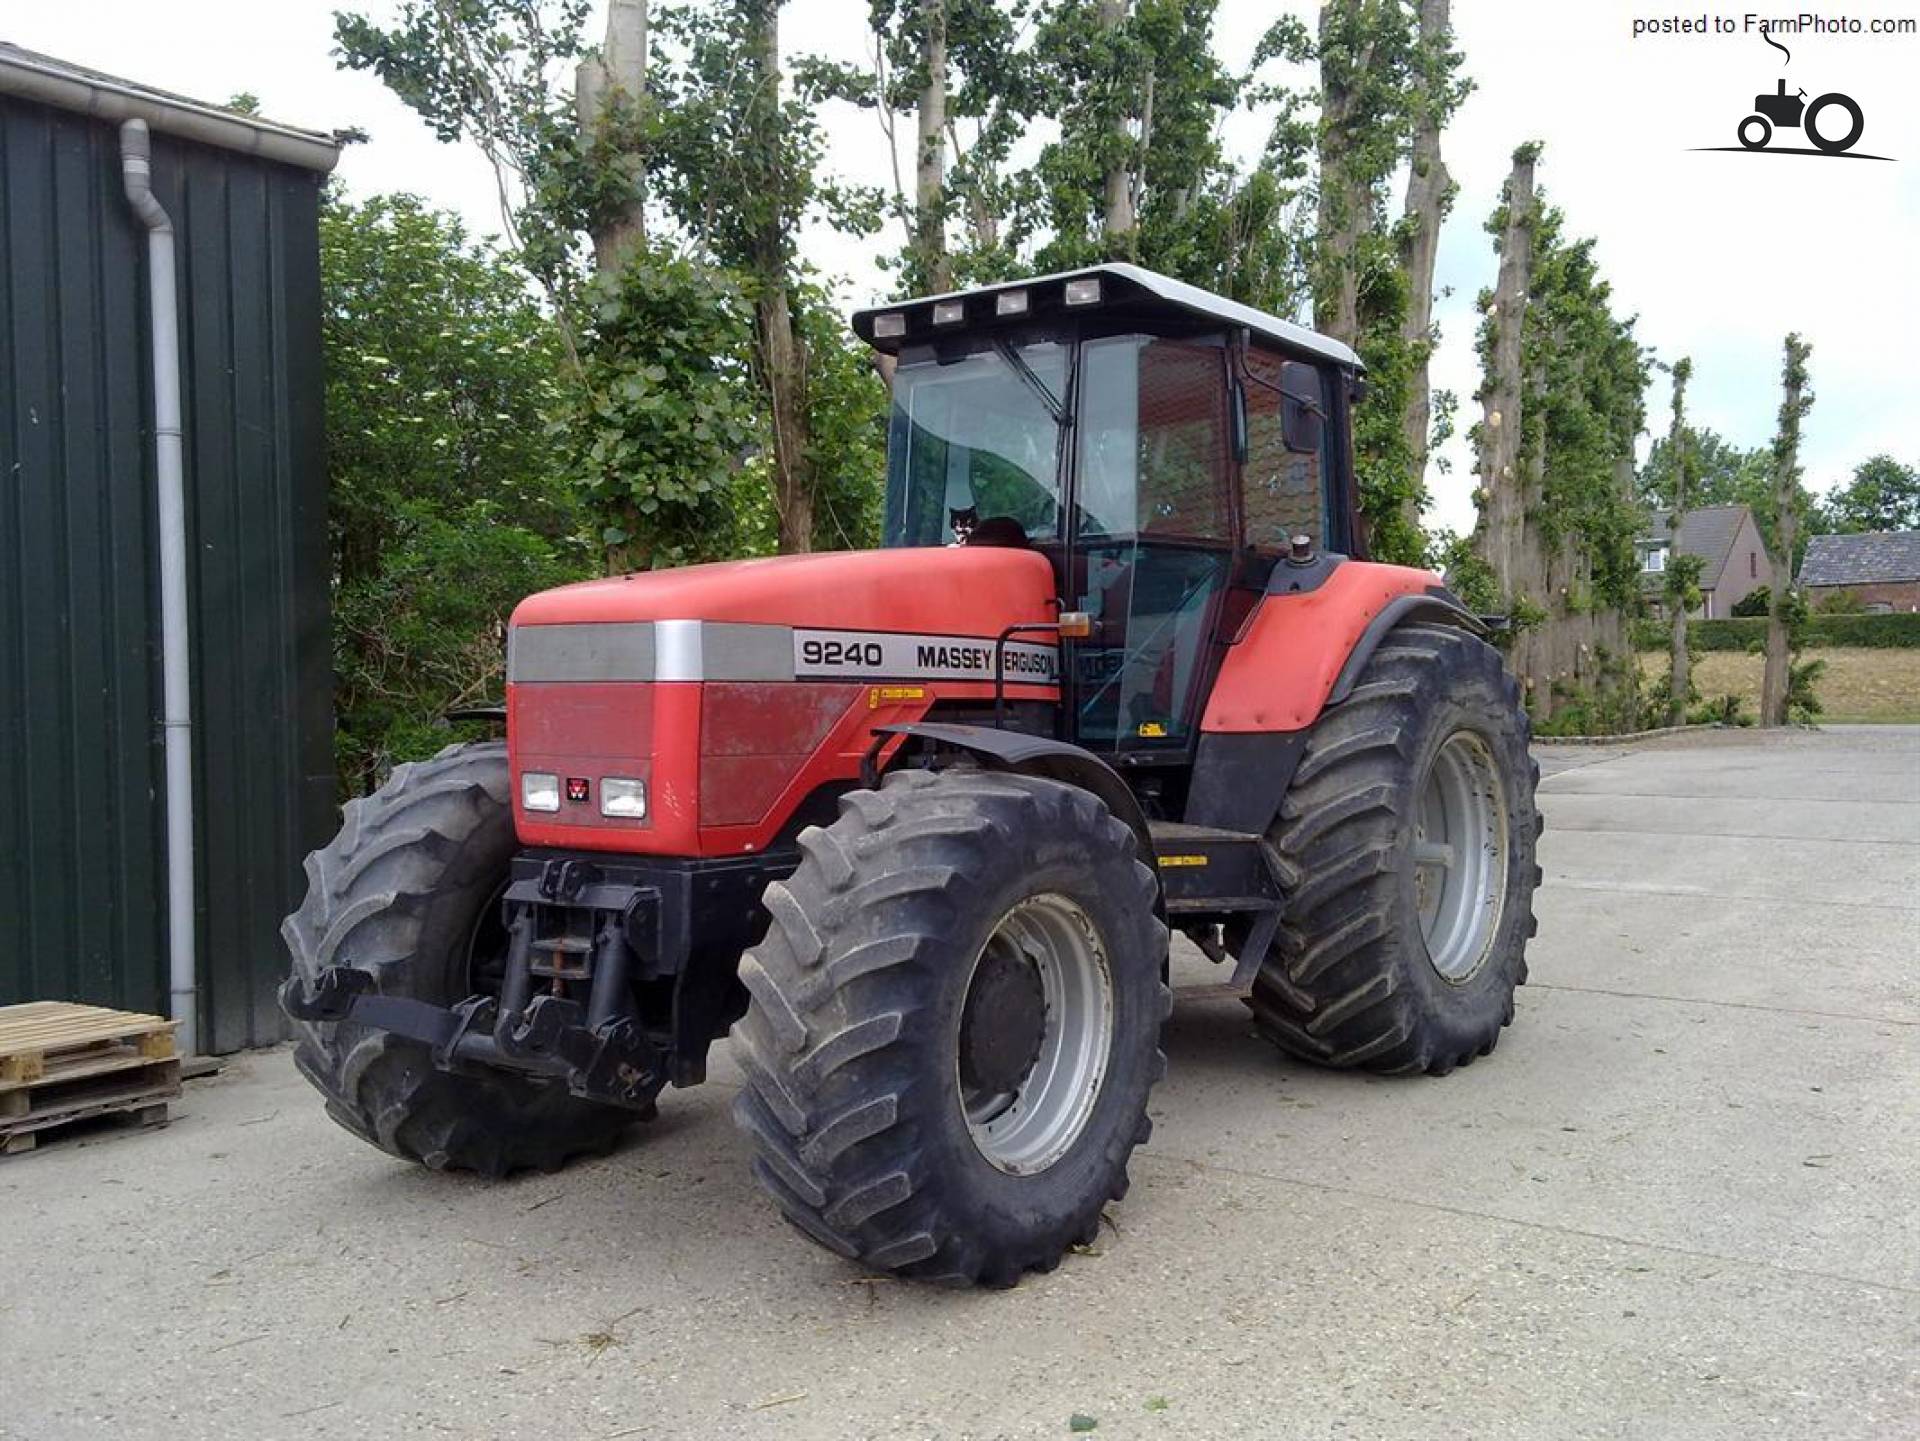 Massey Ferguson 9240 Specs and data - Everything about the Massey ...